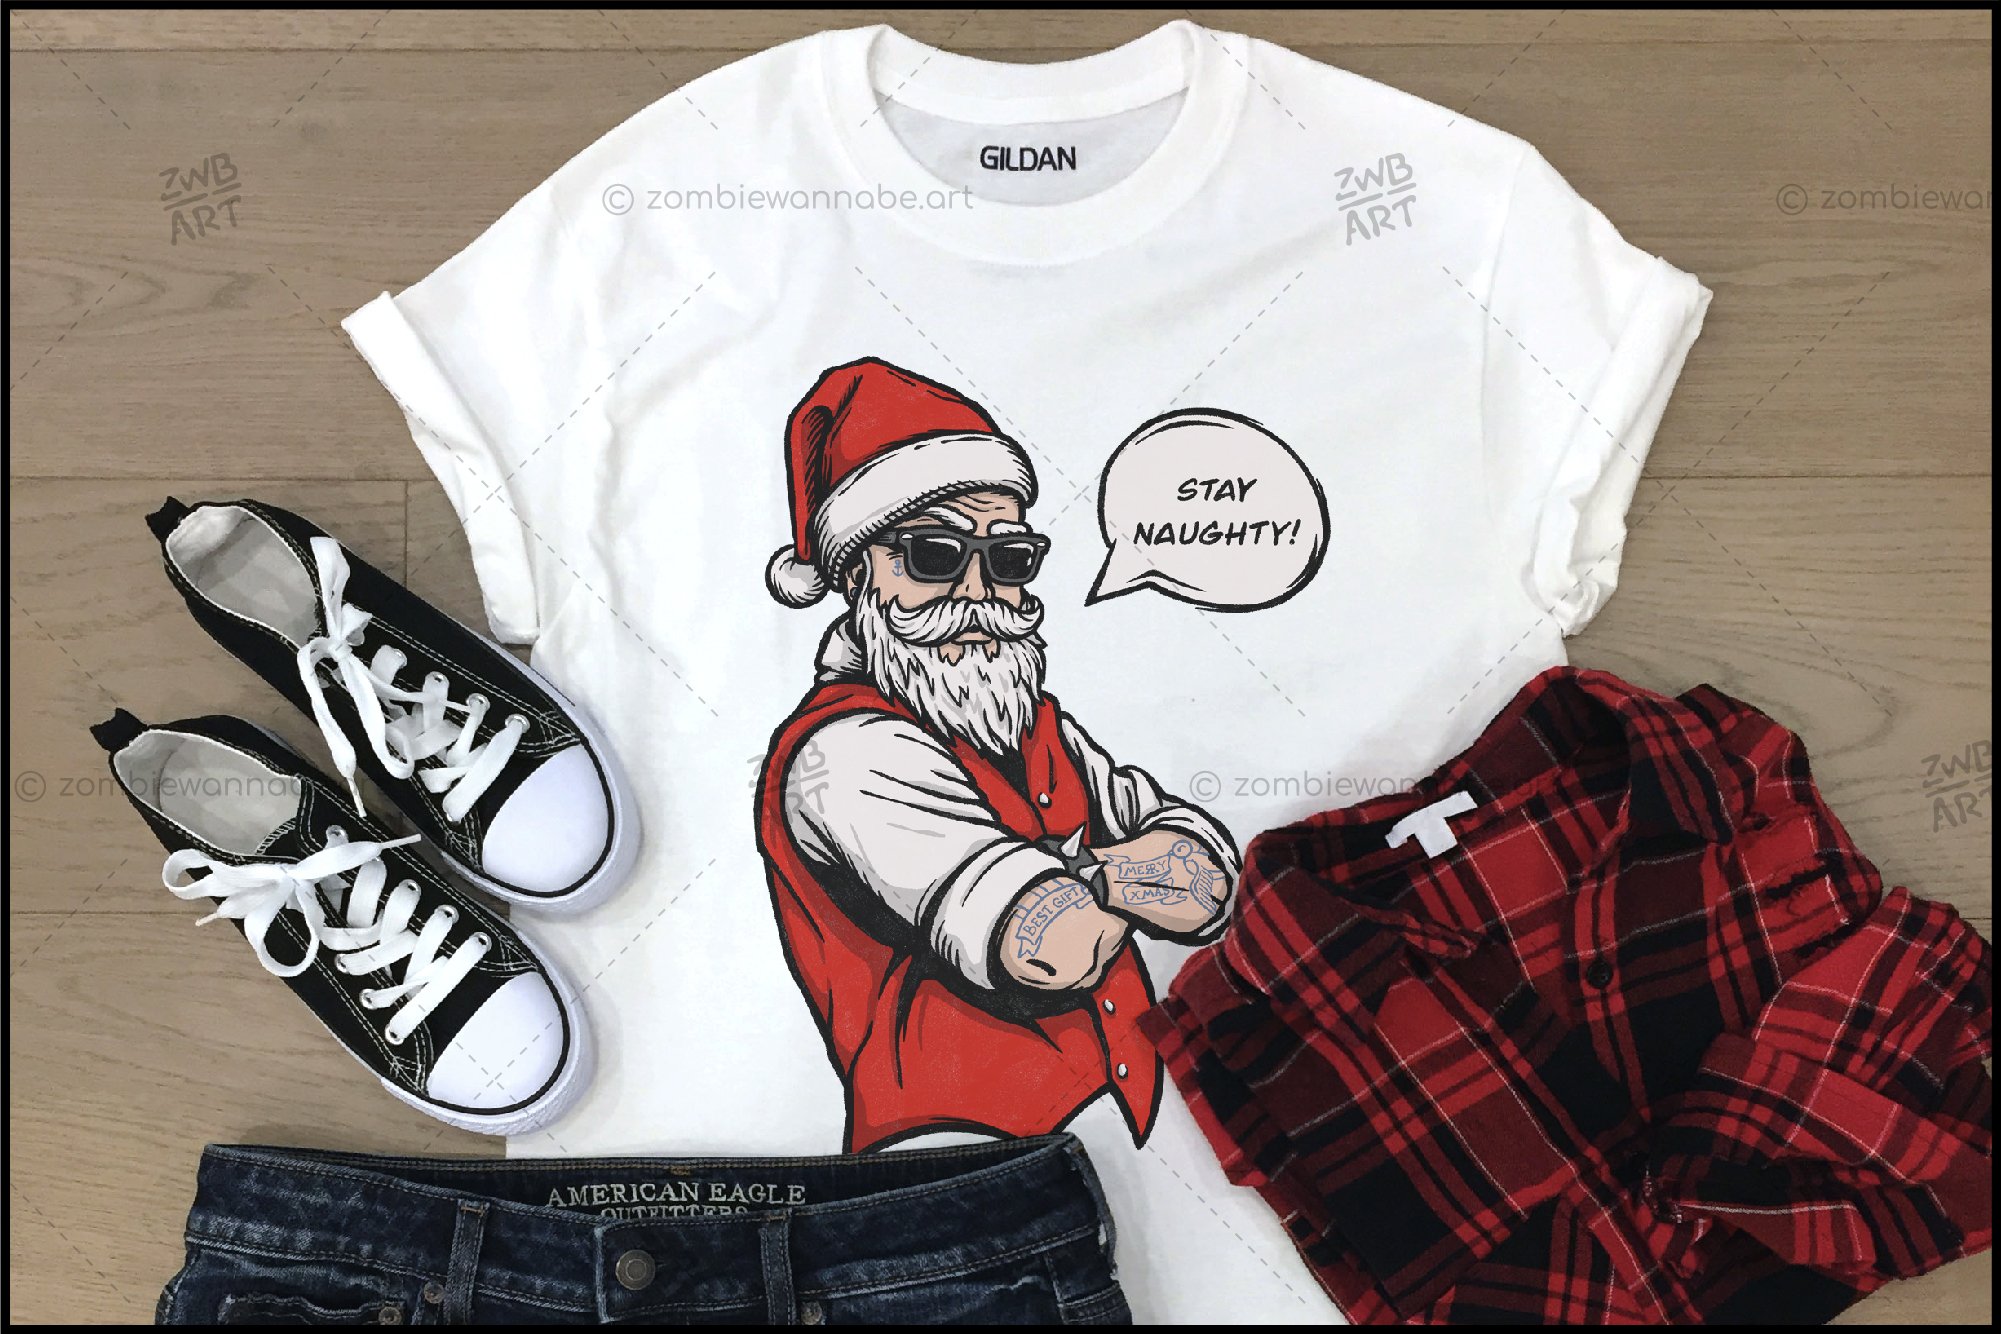 White t-shirt with colorful brutal Santa print.